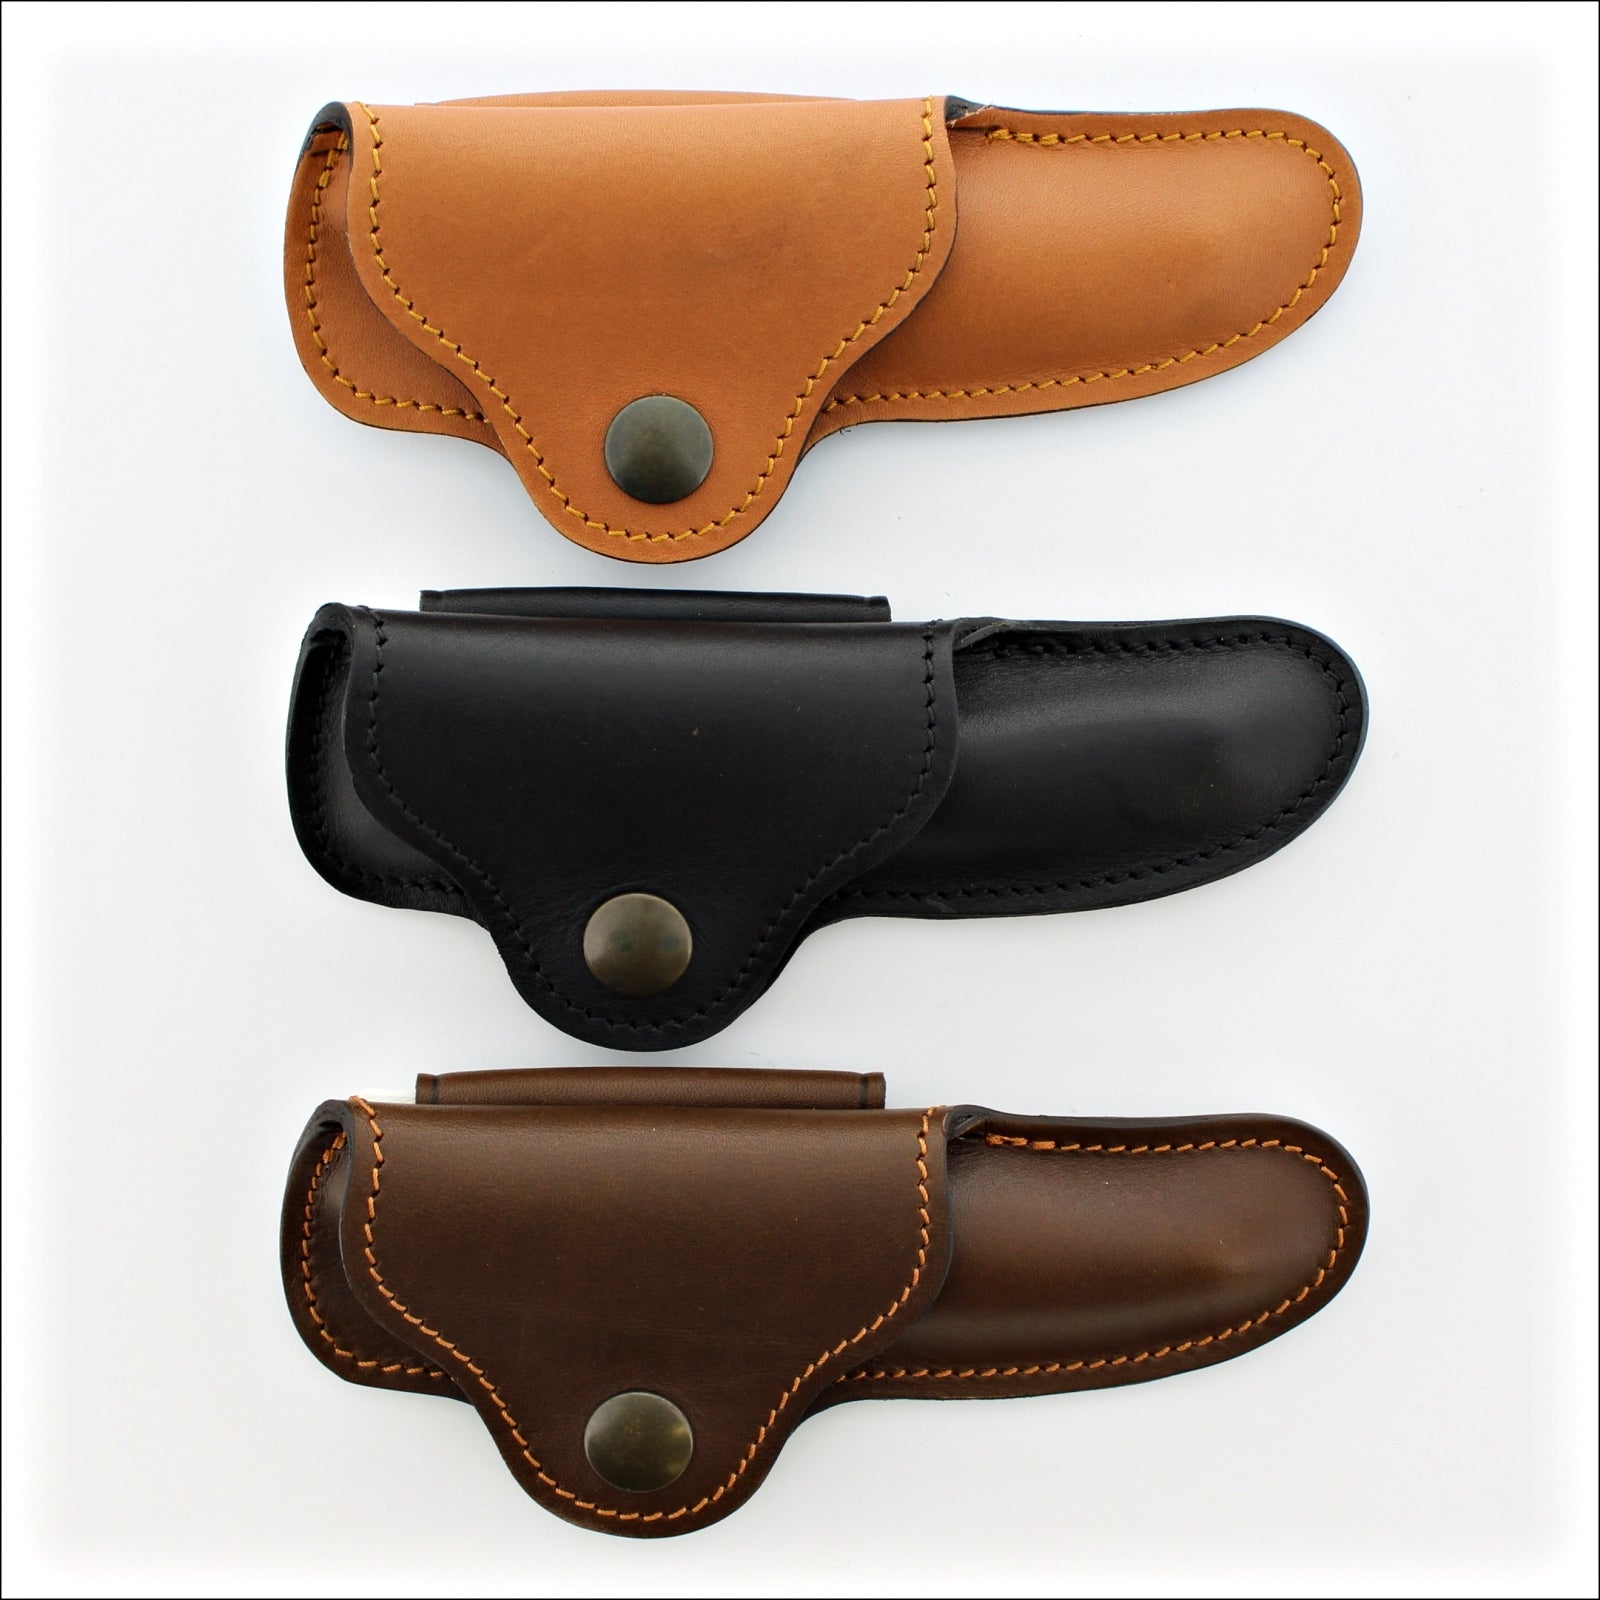 Laguiole leather knife cases and sleeves - Official LAGUIOLE